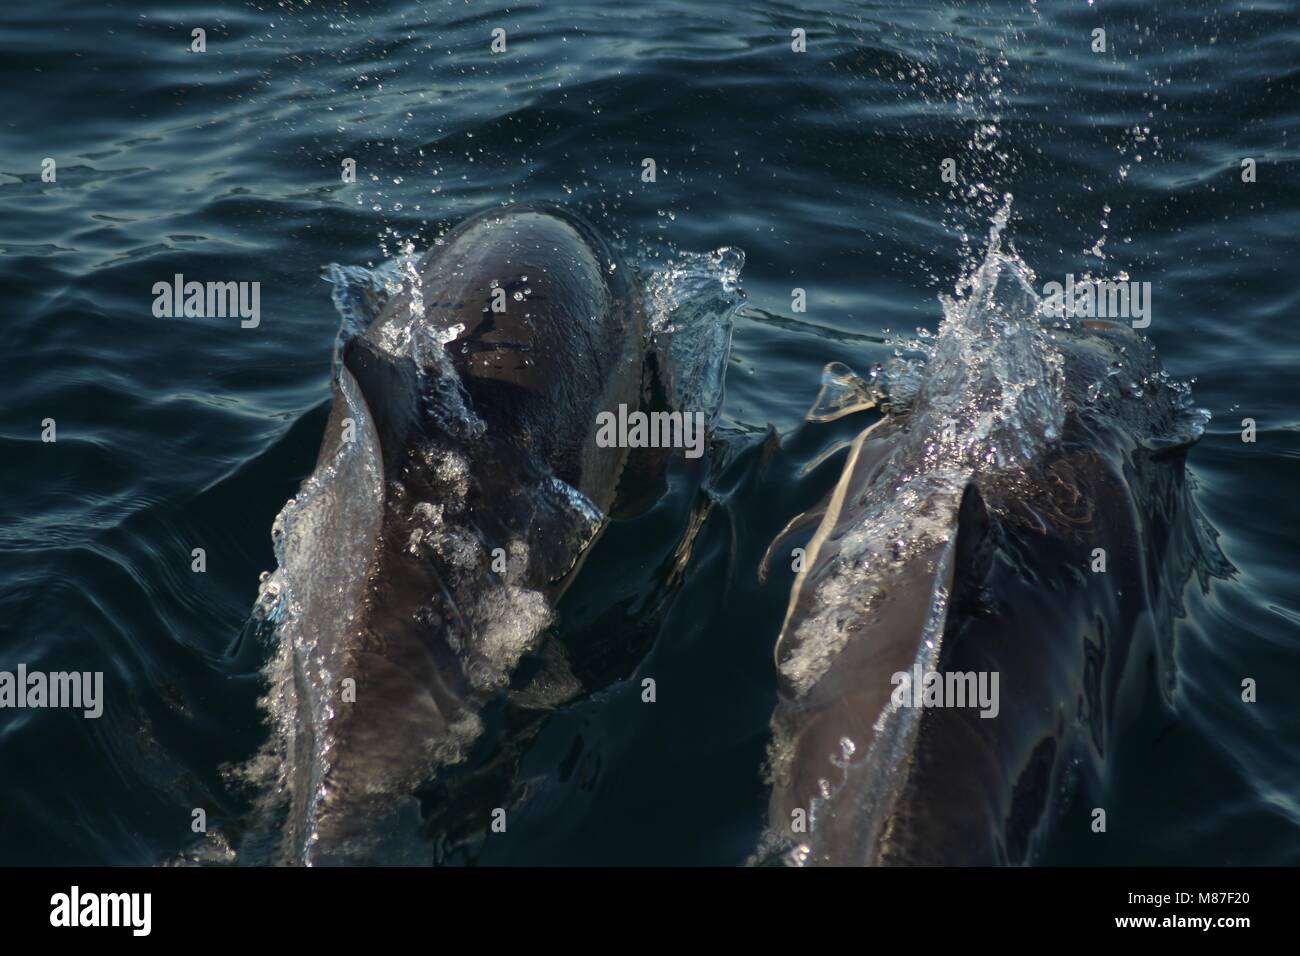 A photo of Common Dolphins swimming along a boat Stock Photo